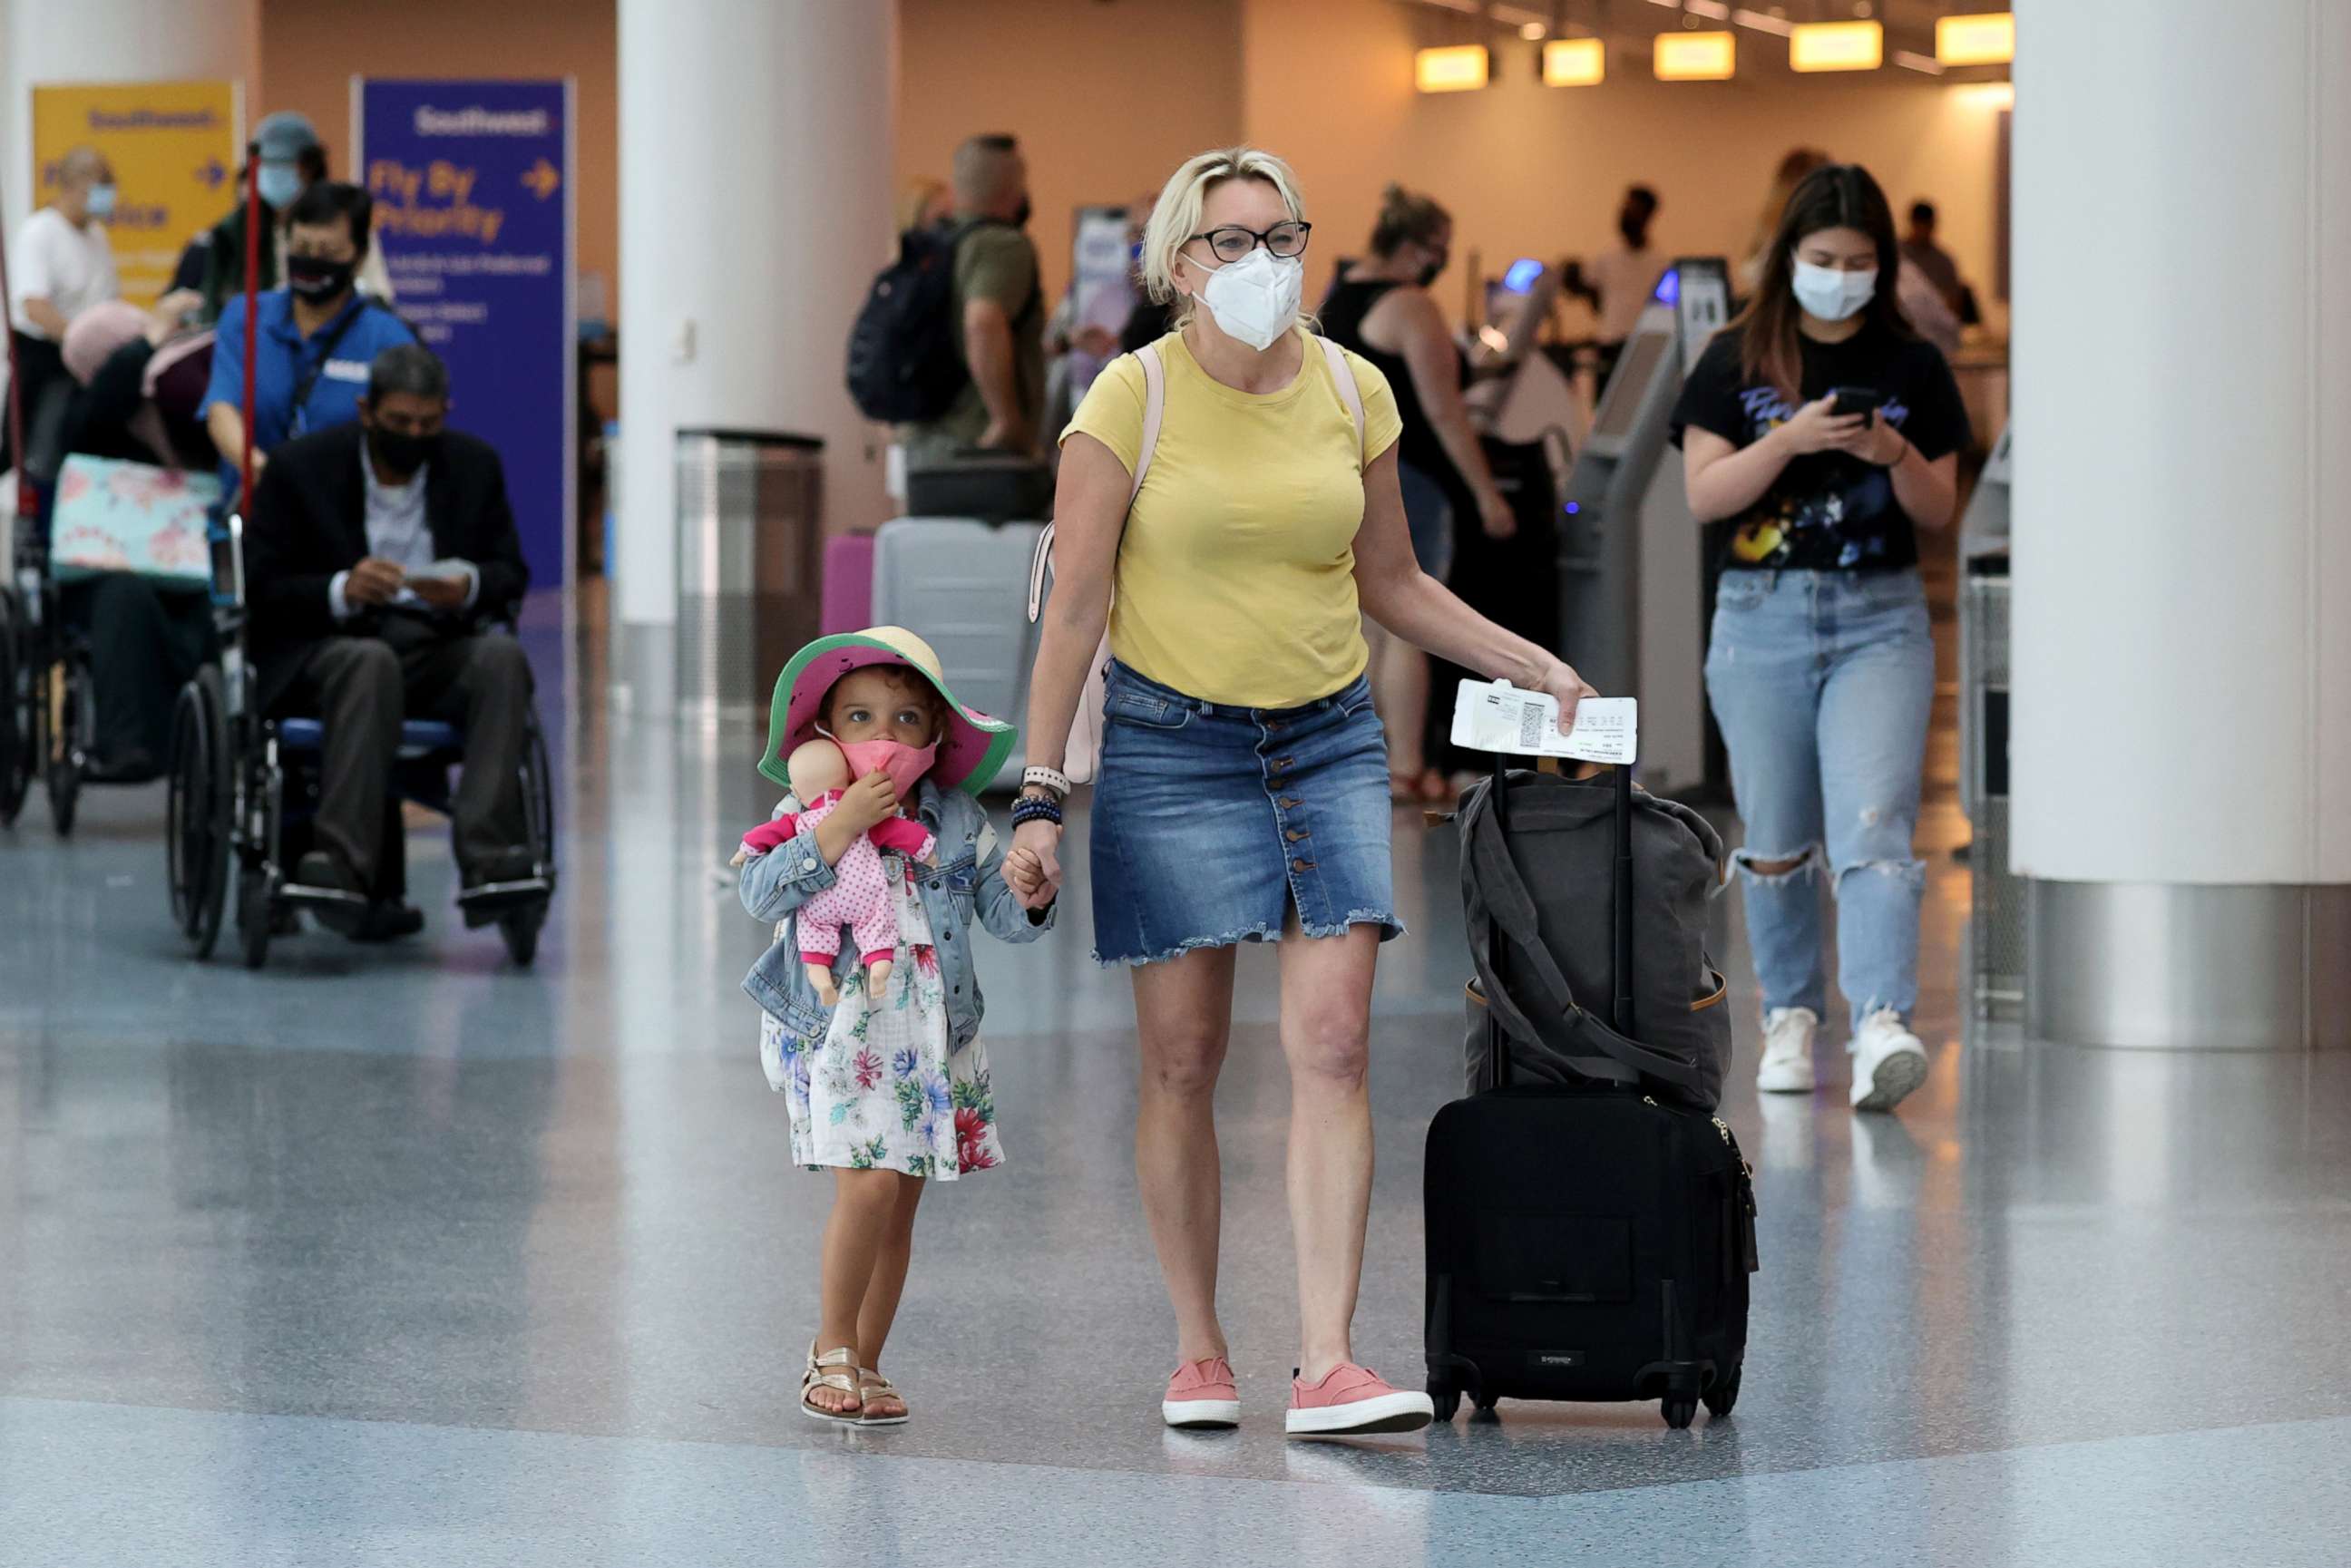 PHOTO: Passengers wear masks as they walk through LAX airport, as the global outbreak of the coronavirus disease (COVID-19) continues, in Los Angeles.